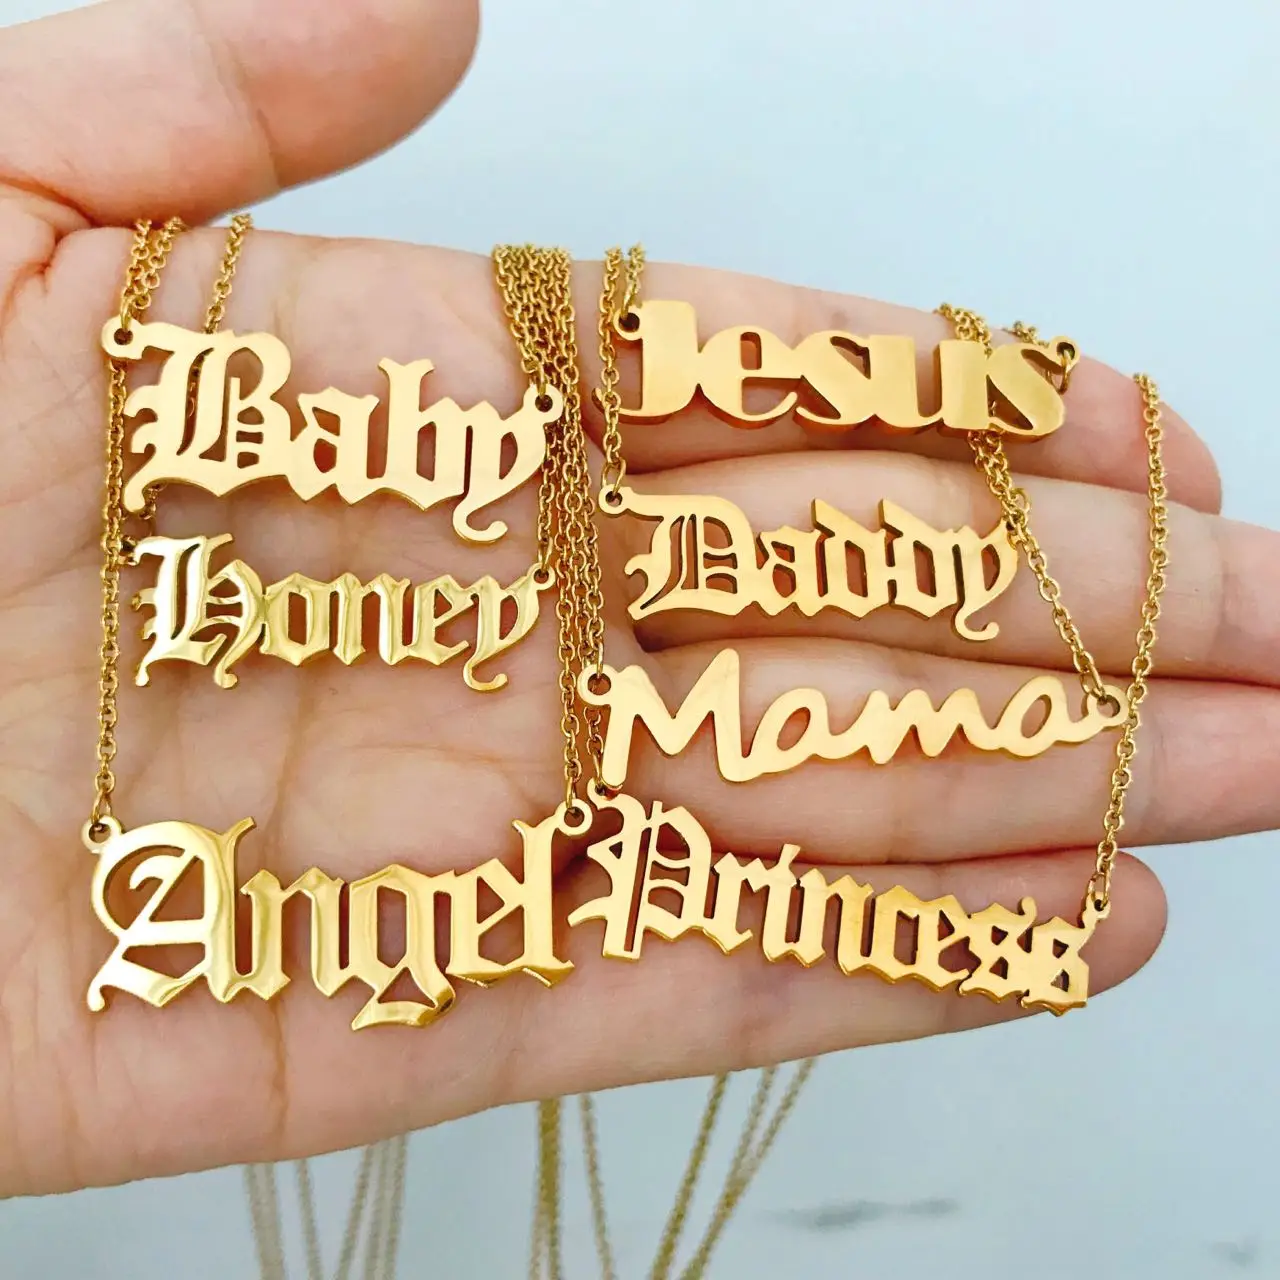 

24k Gold Plated Stainless Steel Women Custom Jewelry Old English Letter Personalized Princess Angel Babygirl Brat Chain Necklace, Picture